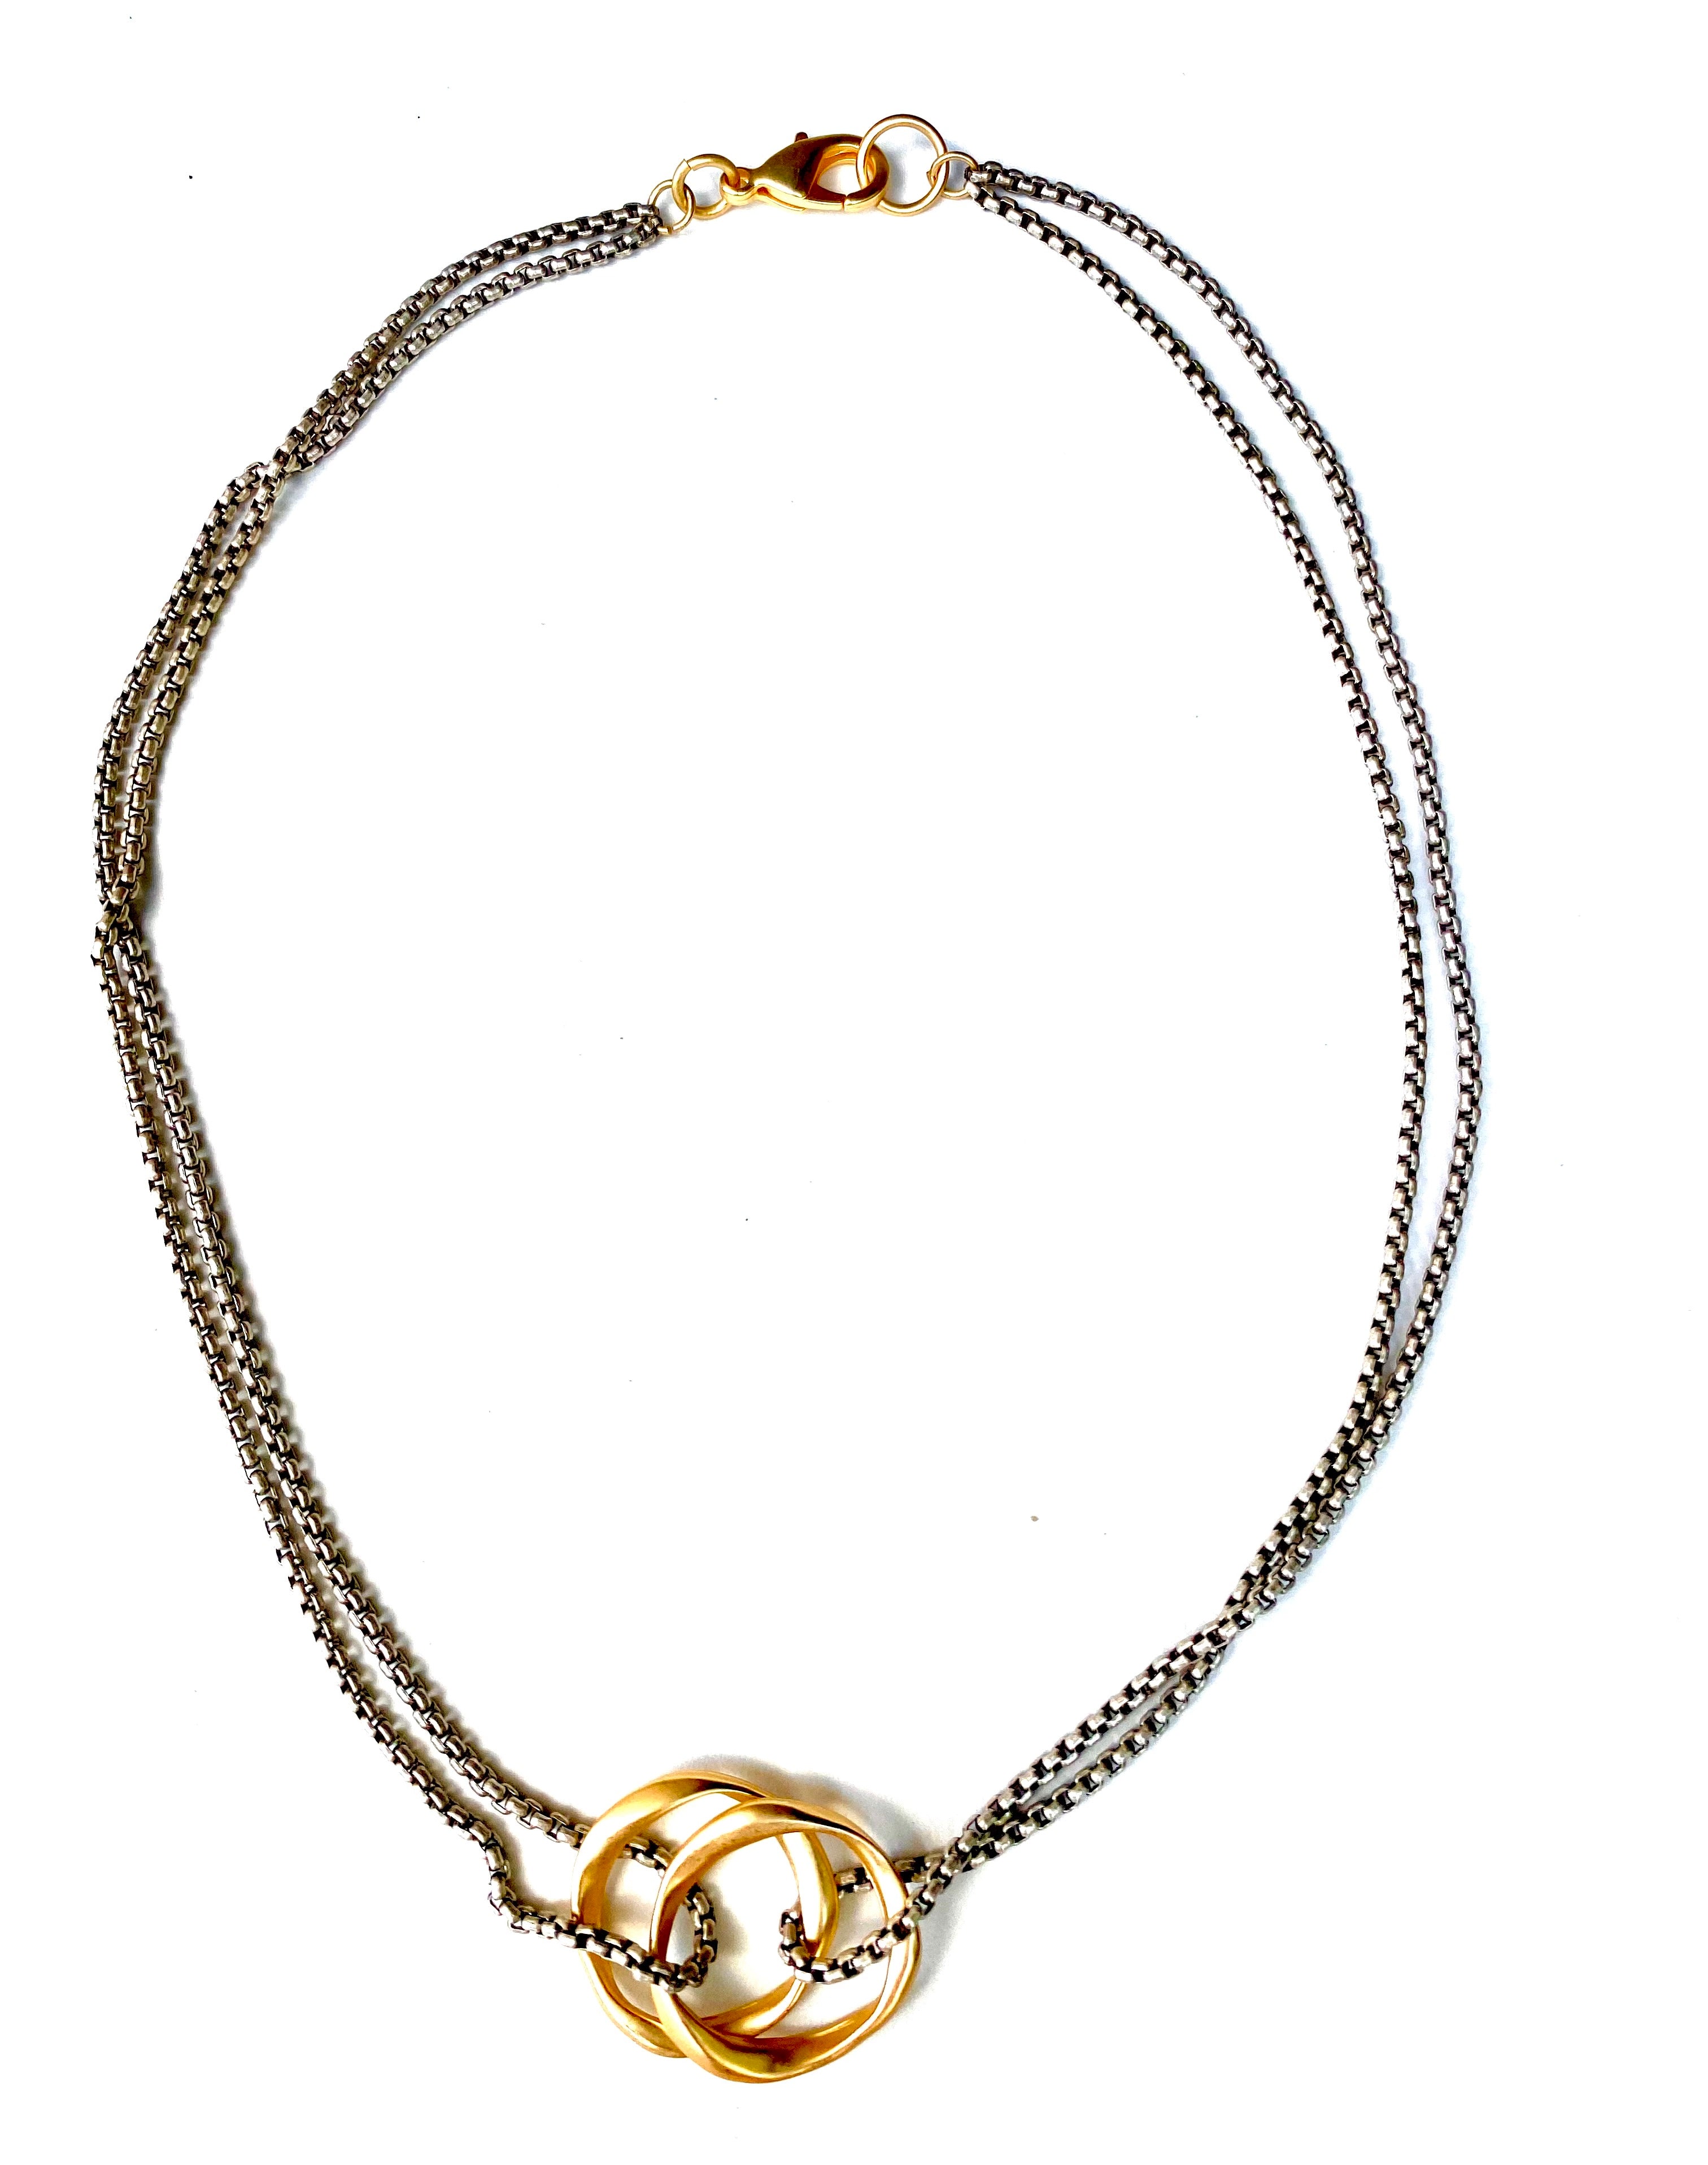 Elle - necklace with organic double circle connector